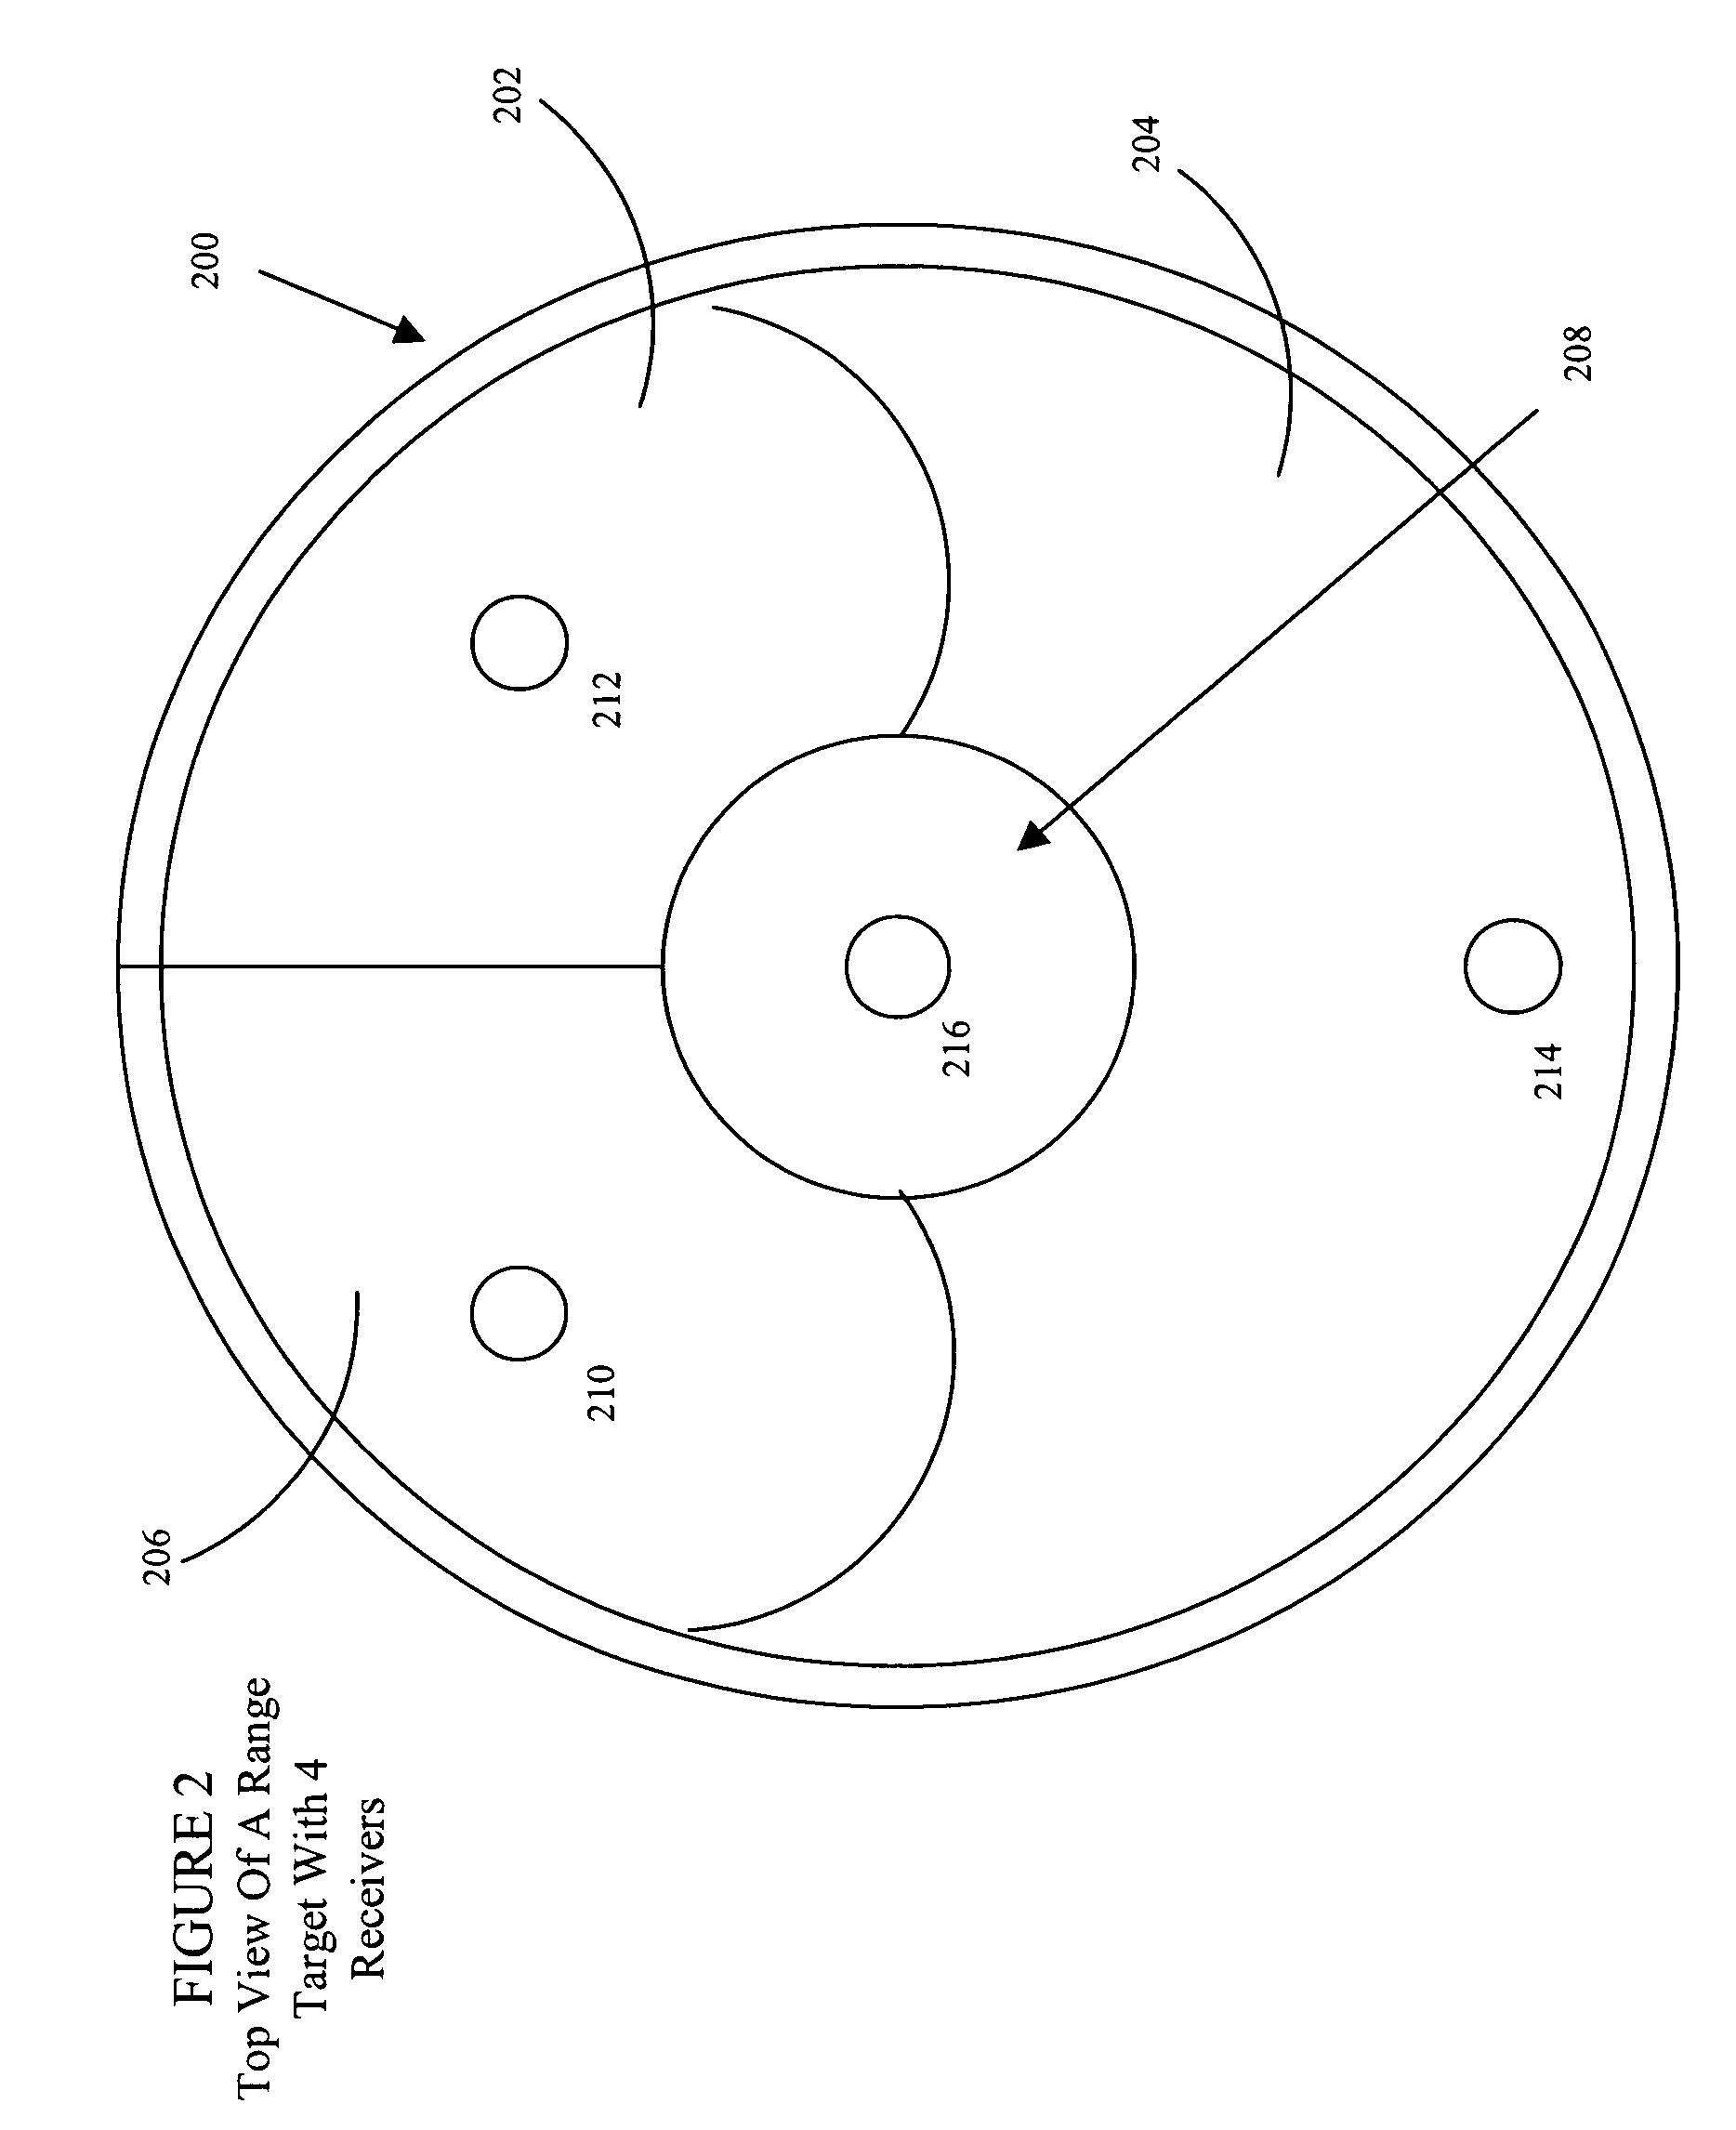 Target-based wagering system and method